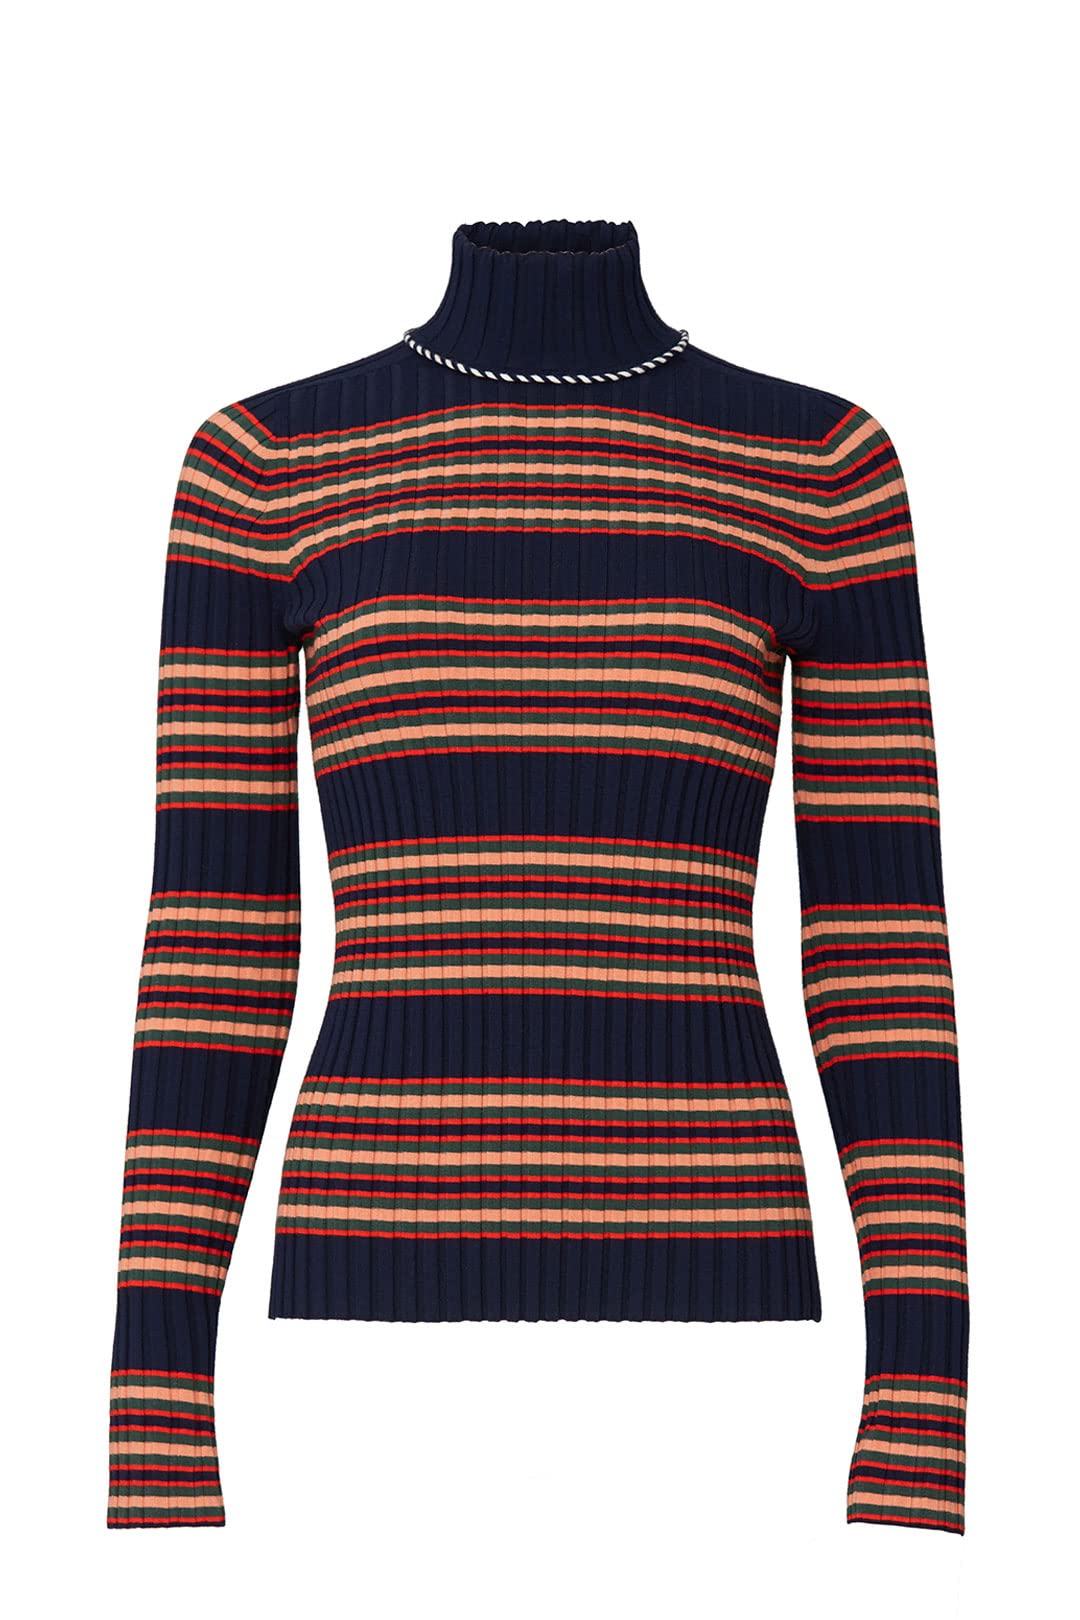 Tory Burch Rent The Runway Pre-Loved Navy Striped Turtleneck